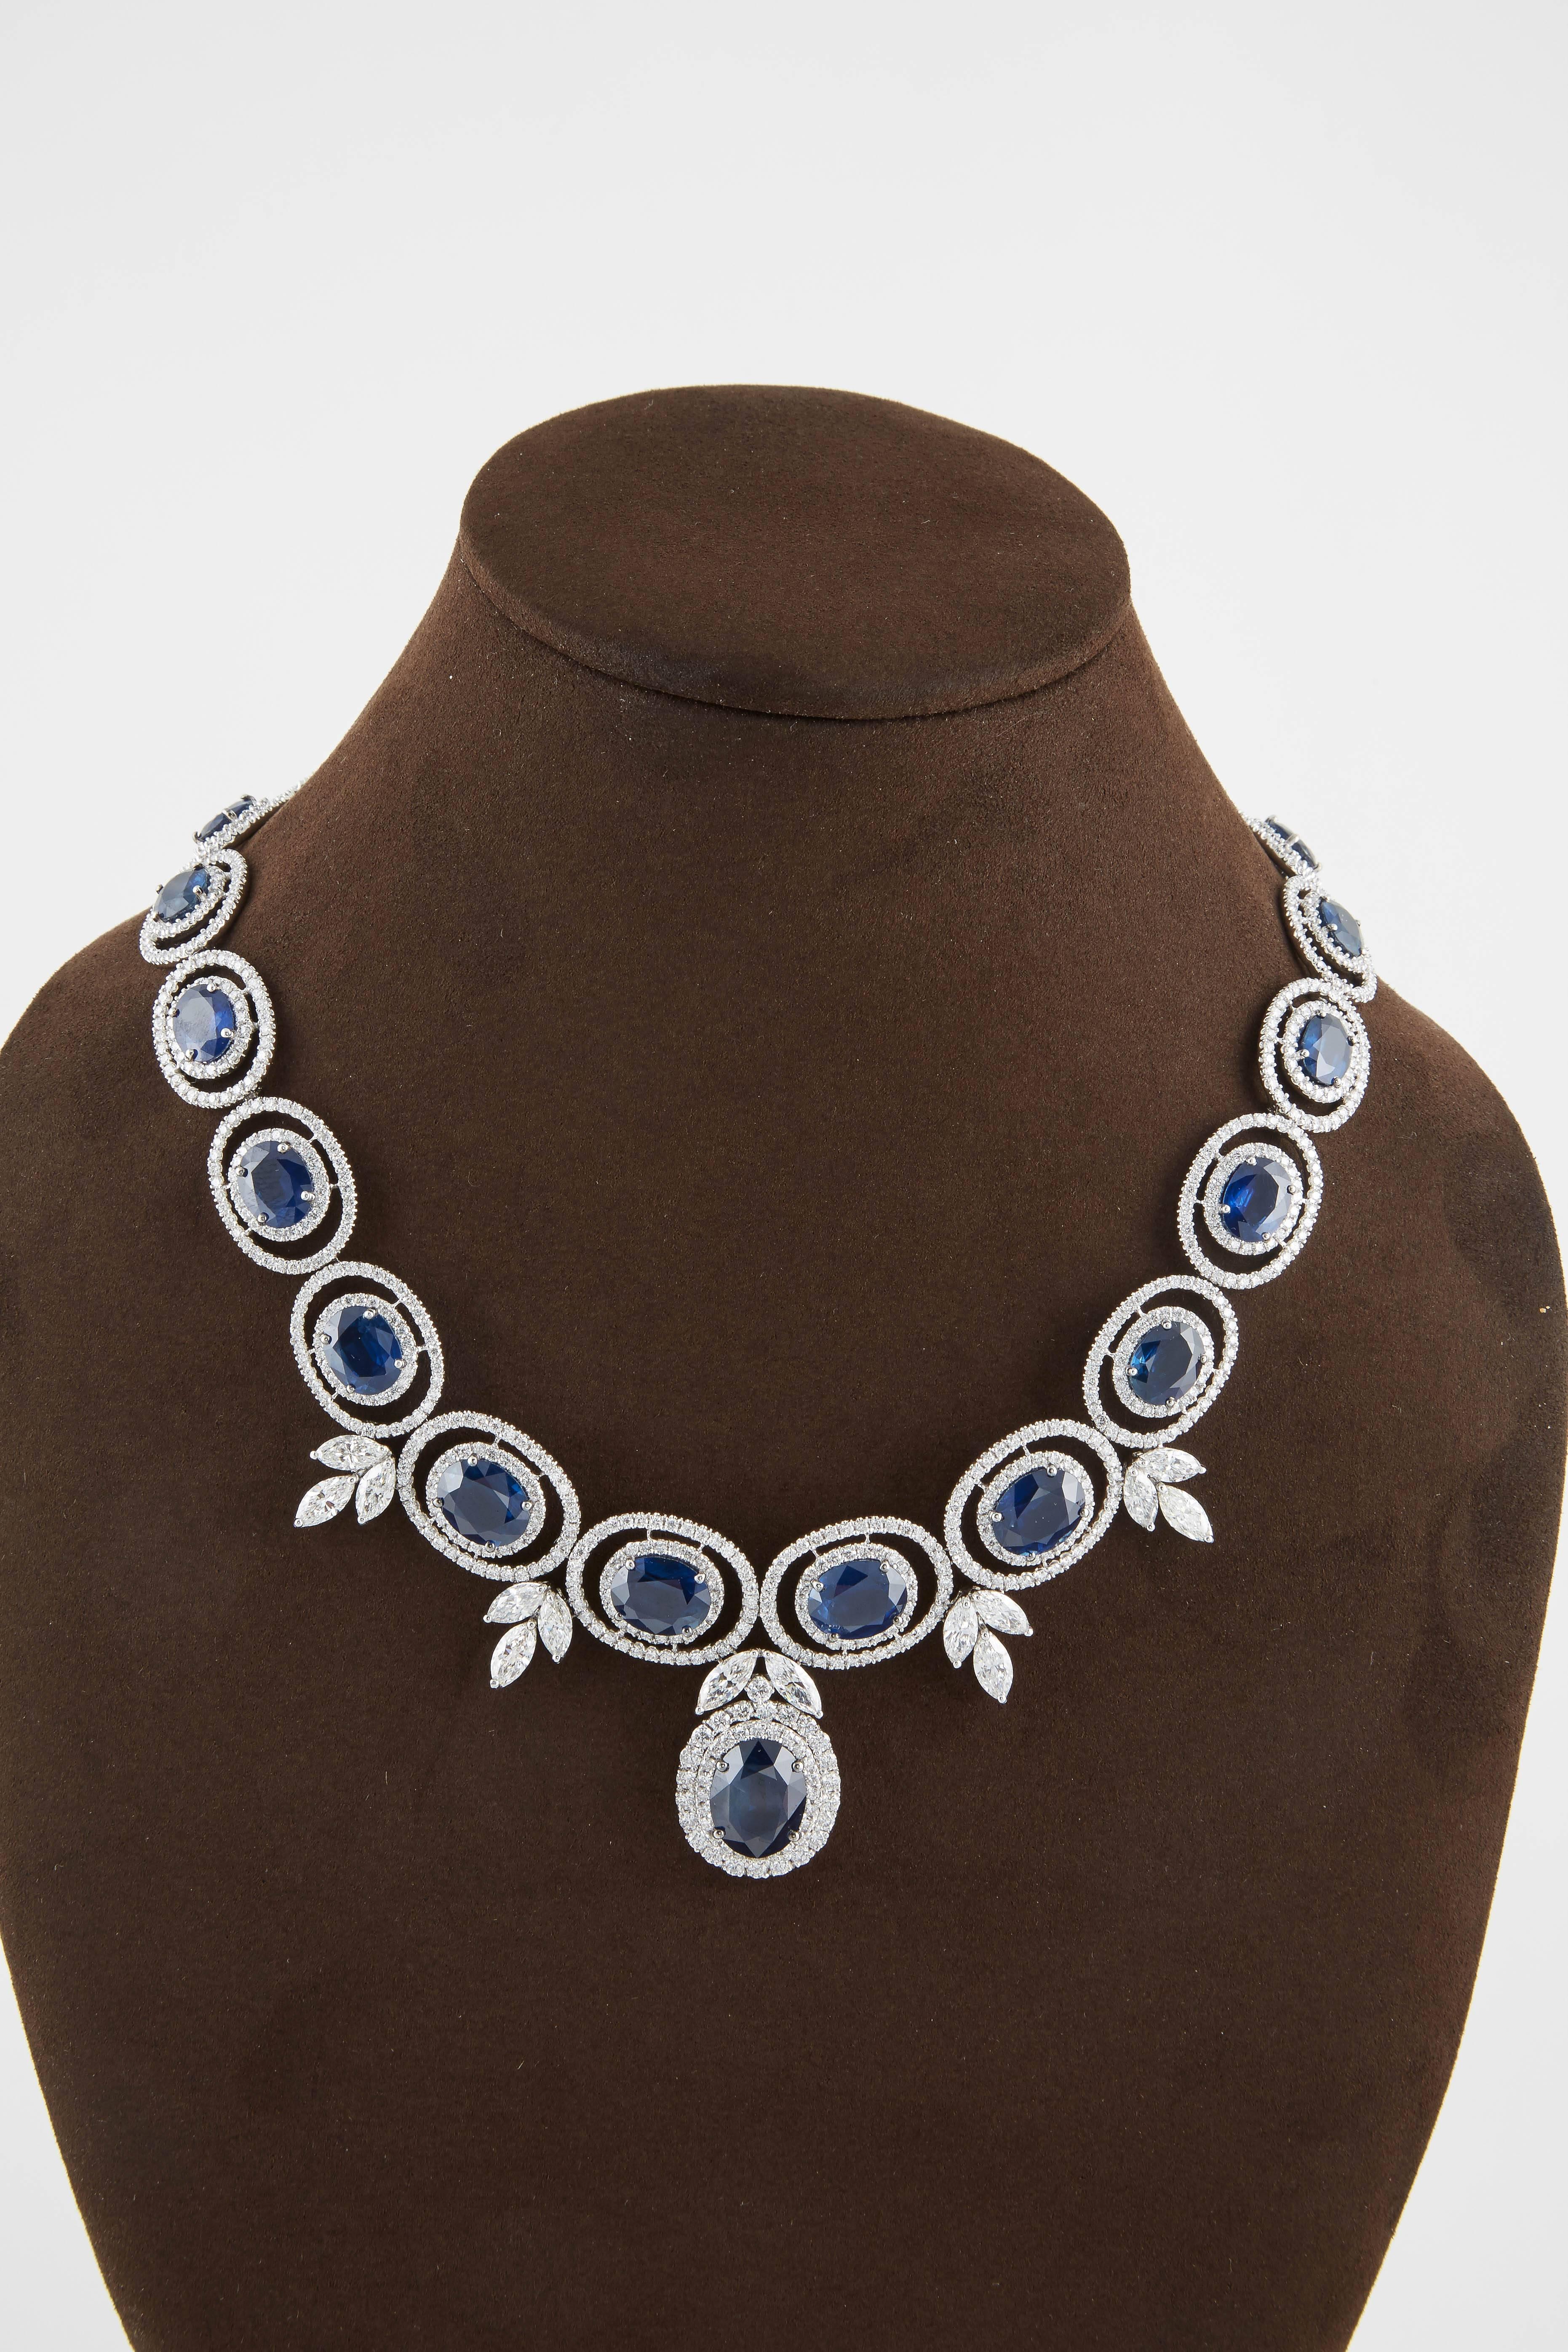 

A beautiful sapphire and diamond necklace.

57.67 carats of fine blue oval sapphires.

24.92 carats of white round and marquise cut diamonds.

18k white gold 

16.25 inch neck length, but can be adjusted. 

A spectacular piece!!

